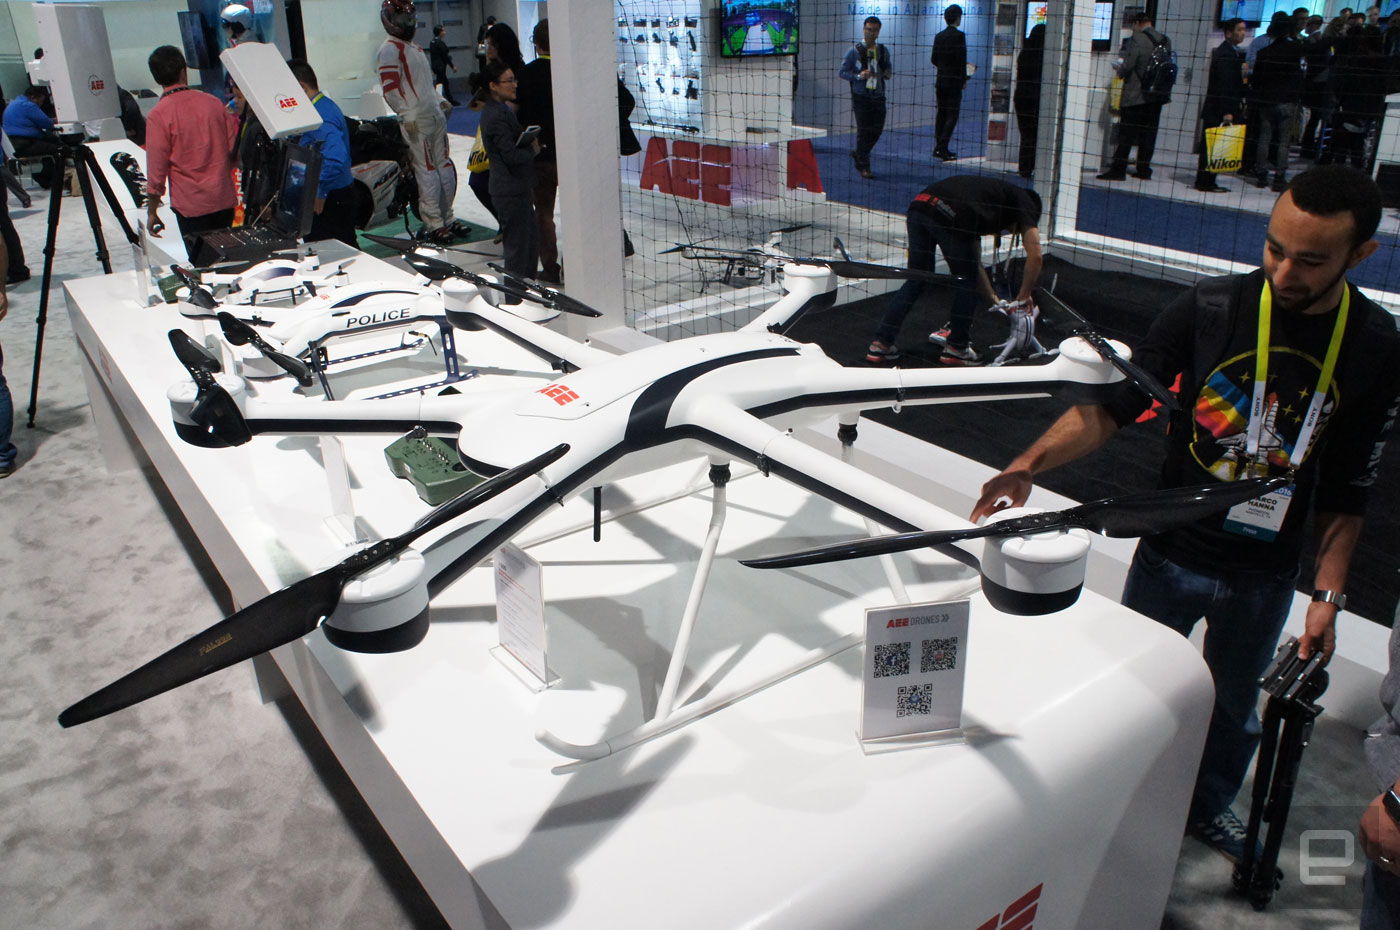 At over five feet wide, this drone is not for noobs